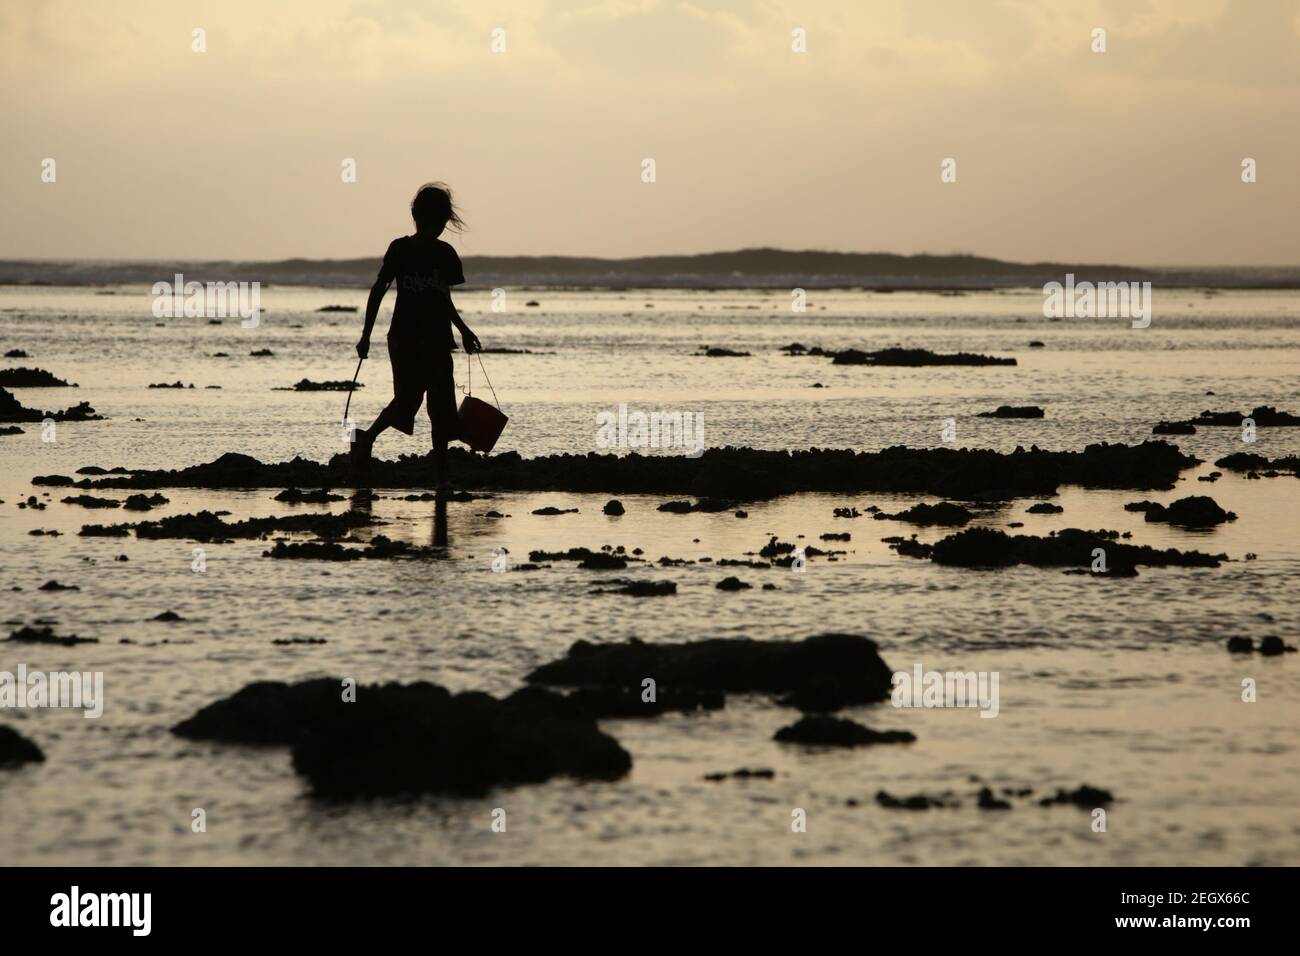 A young woman silhouetted as she is walking on rocky intertidal beach during low tide, carrying plastic buckets to collect sea products. Stock Photo